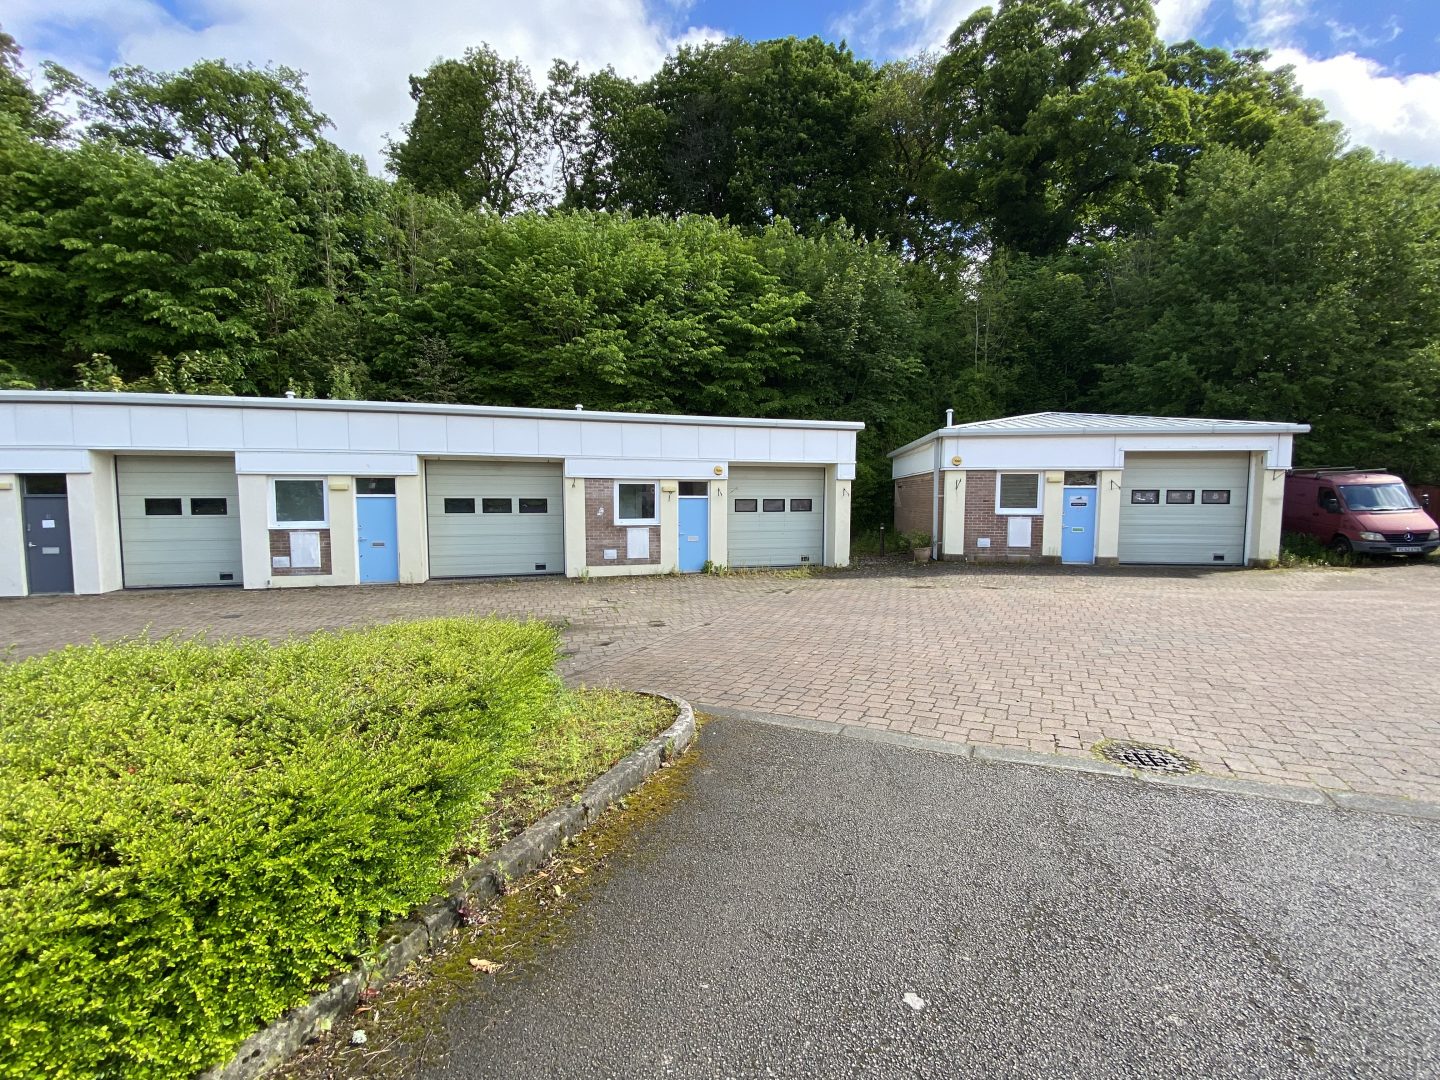 Unit 4 Station Yard Workshops, Alston – LET (SUBJECT TO CONTRACT)